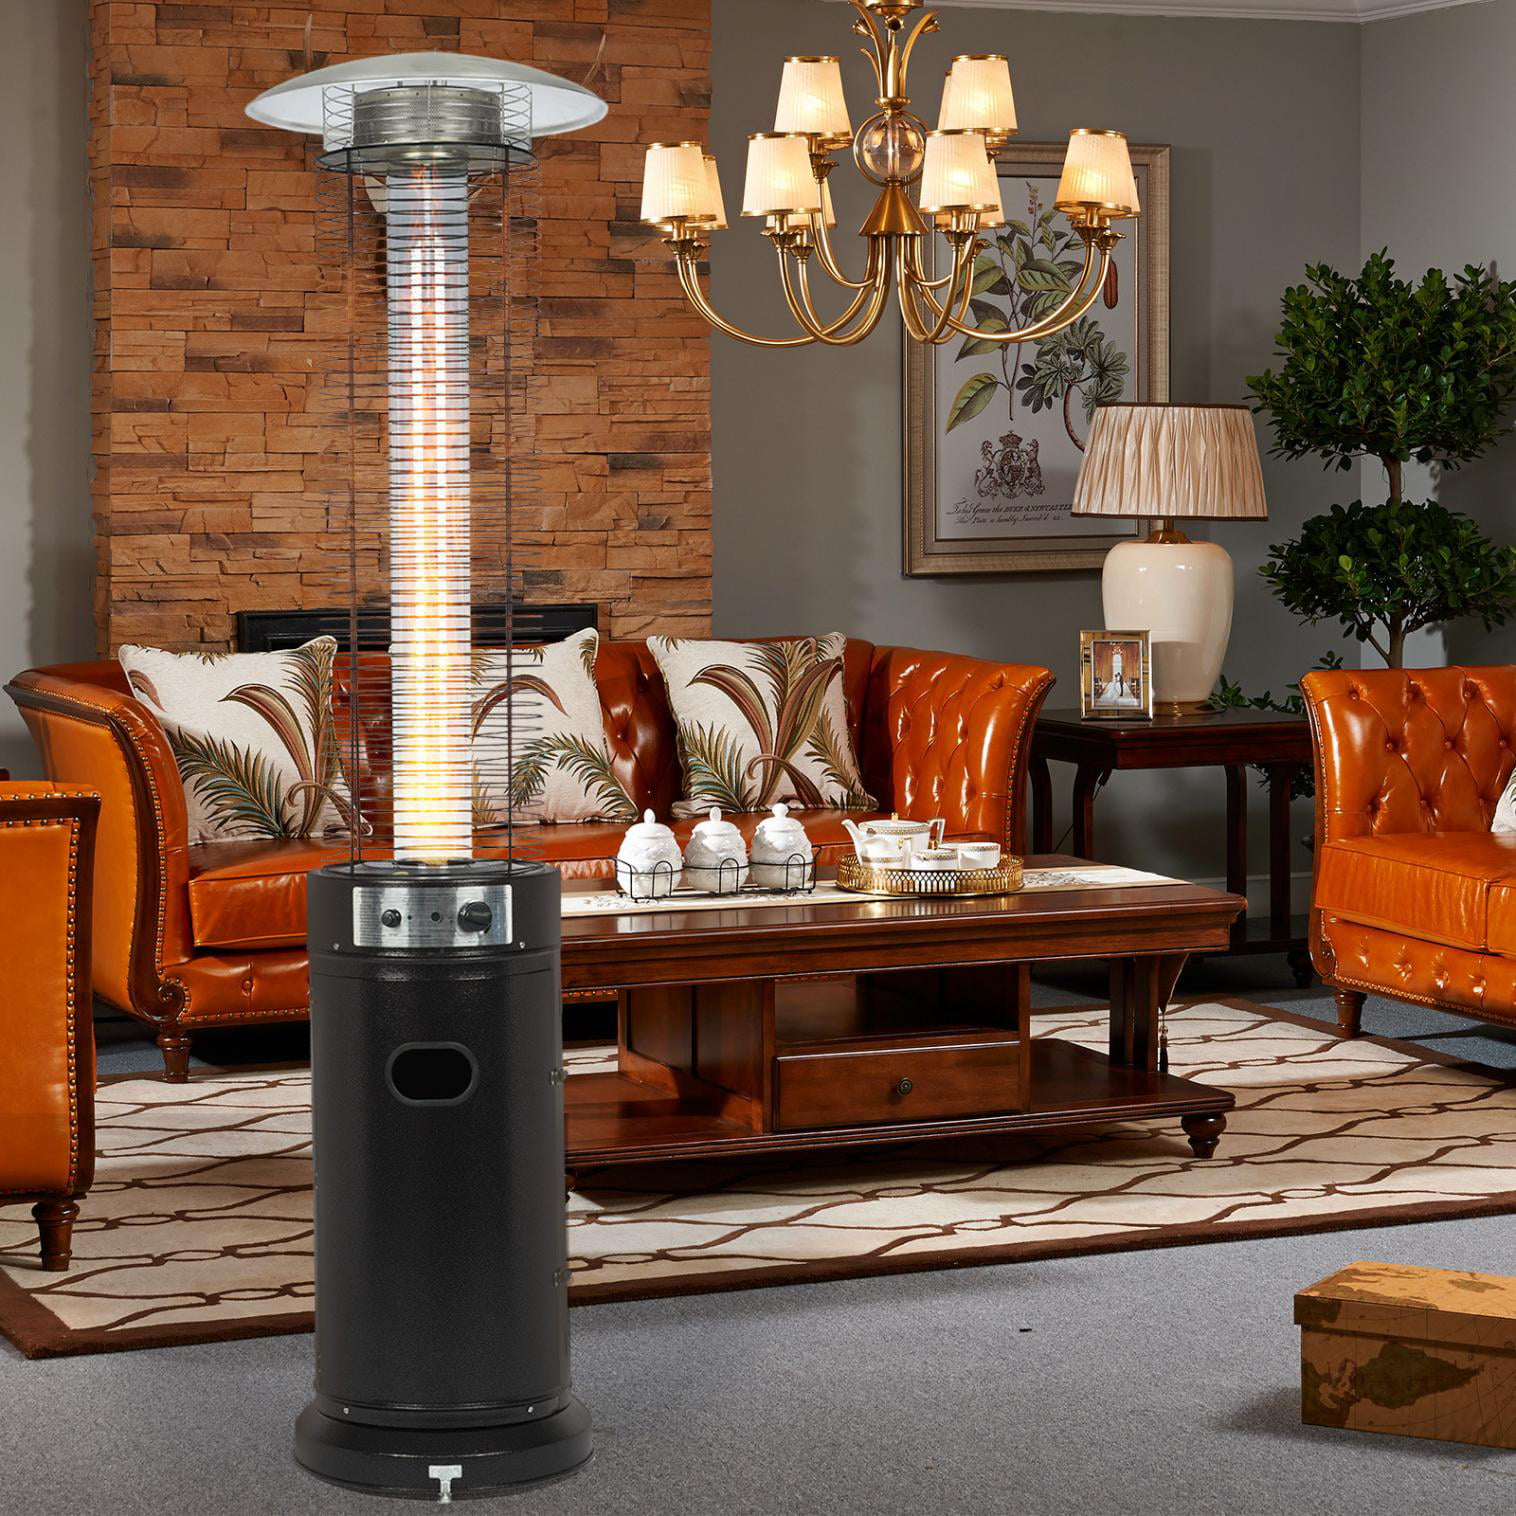 Includes Wheels Anti-Tilt and Safety Shut-Off Residential and Commercial Rich-Mocha Matte Finish Round Spiral-Flame Glass Tube Golden Flame Resort Model Outdoor Propane Patio Heater 40,000 BTU 